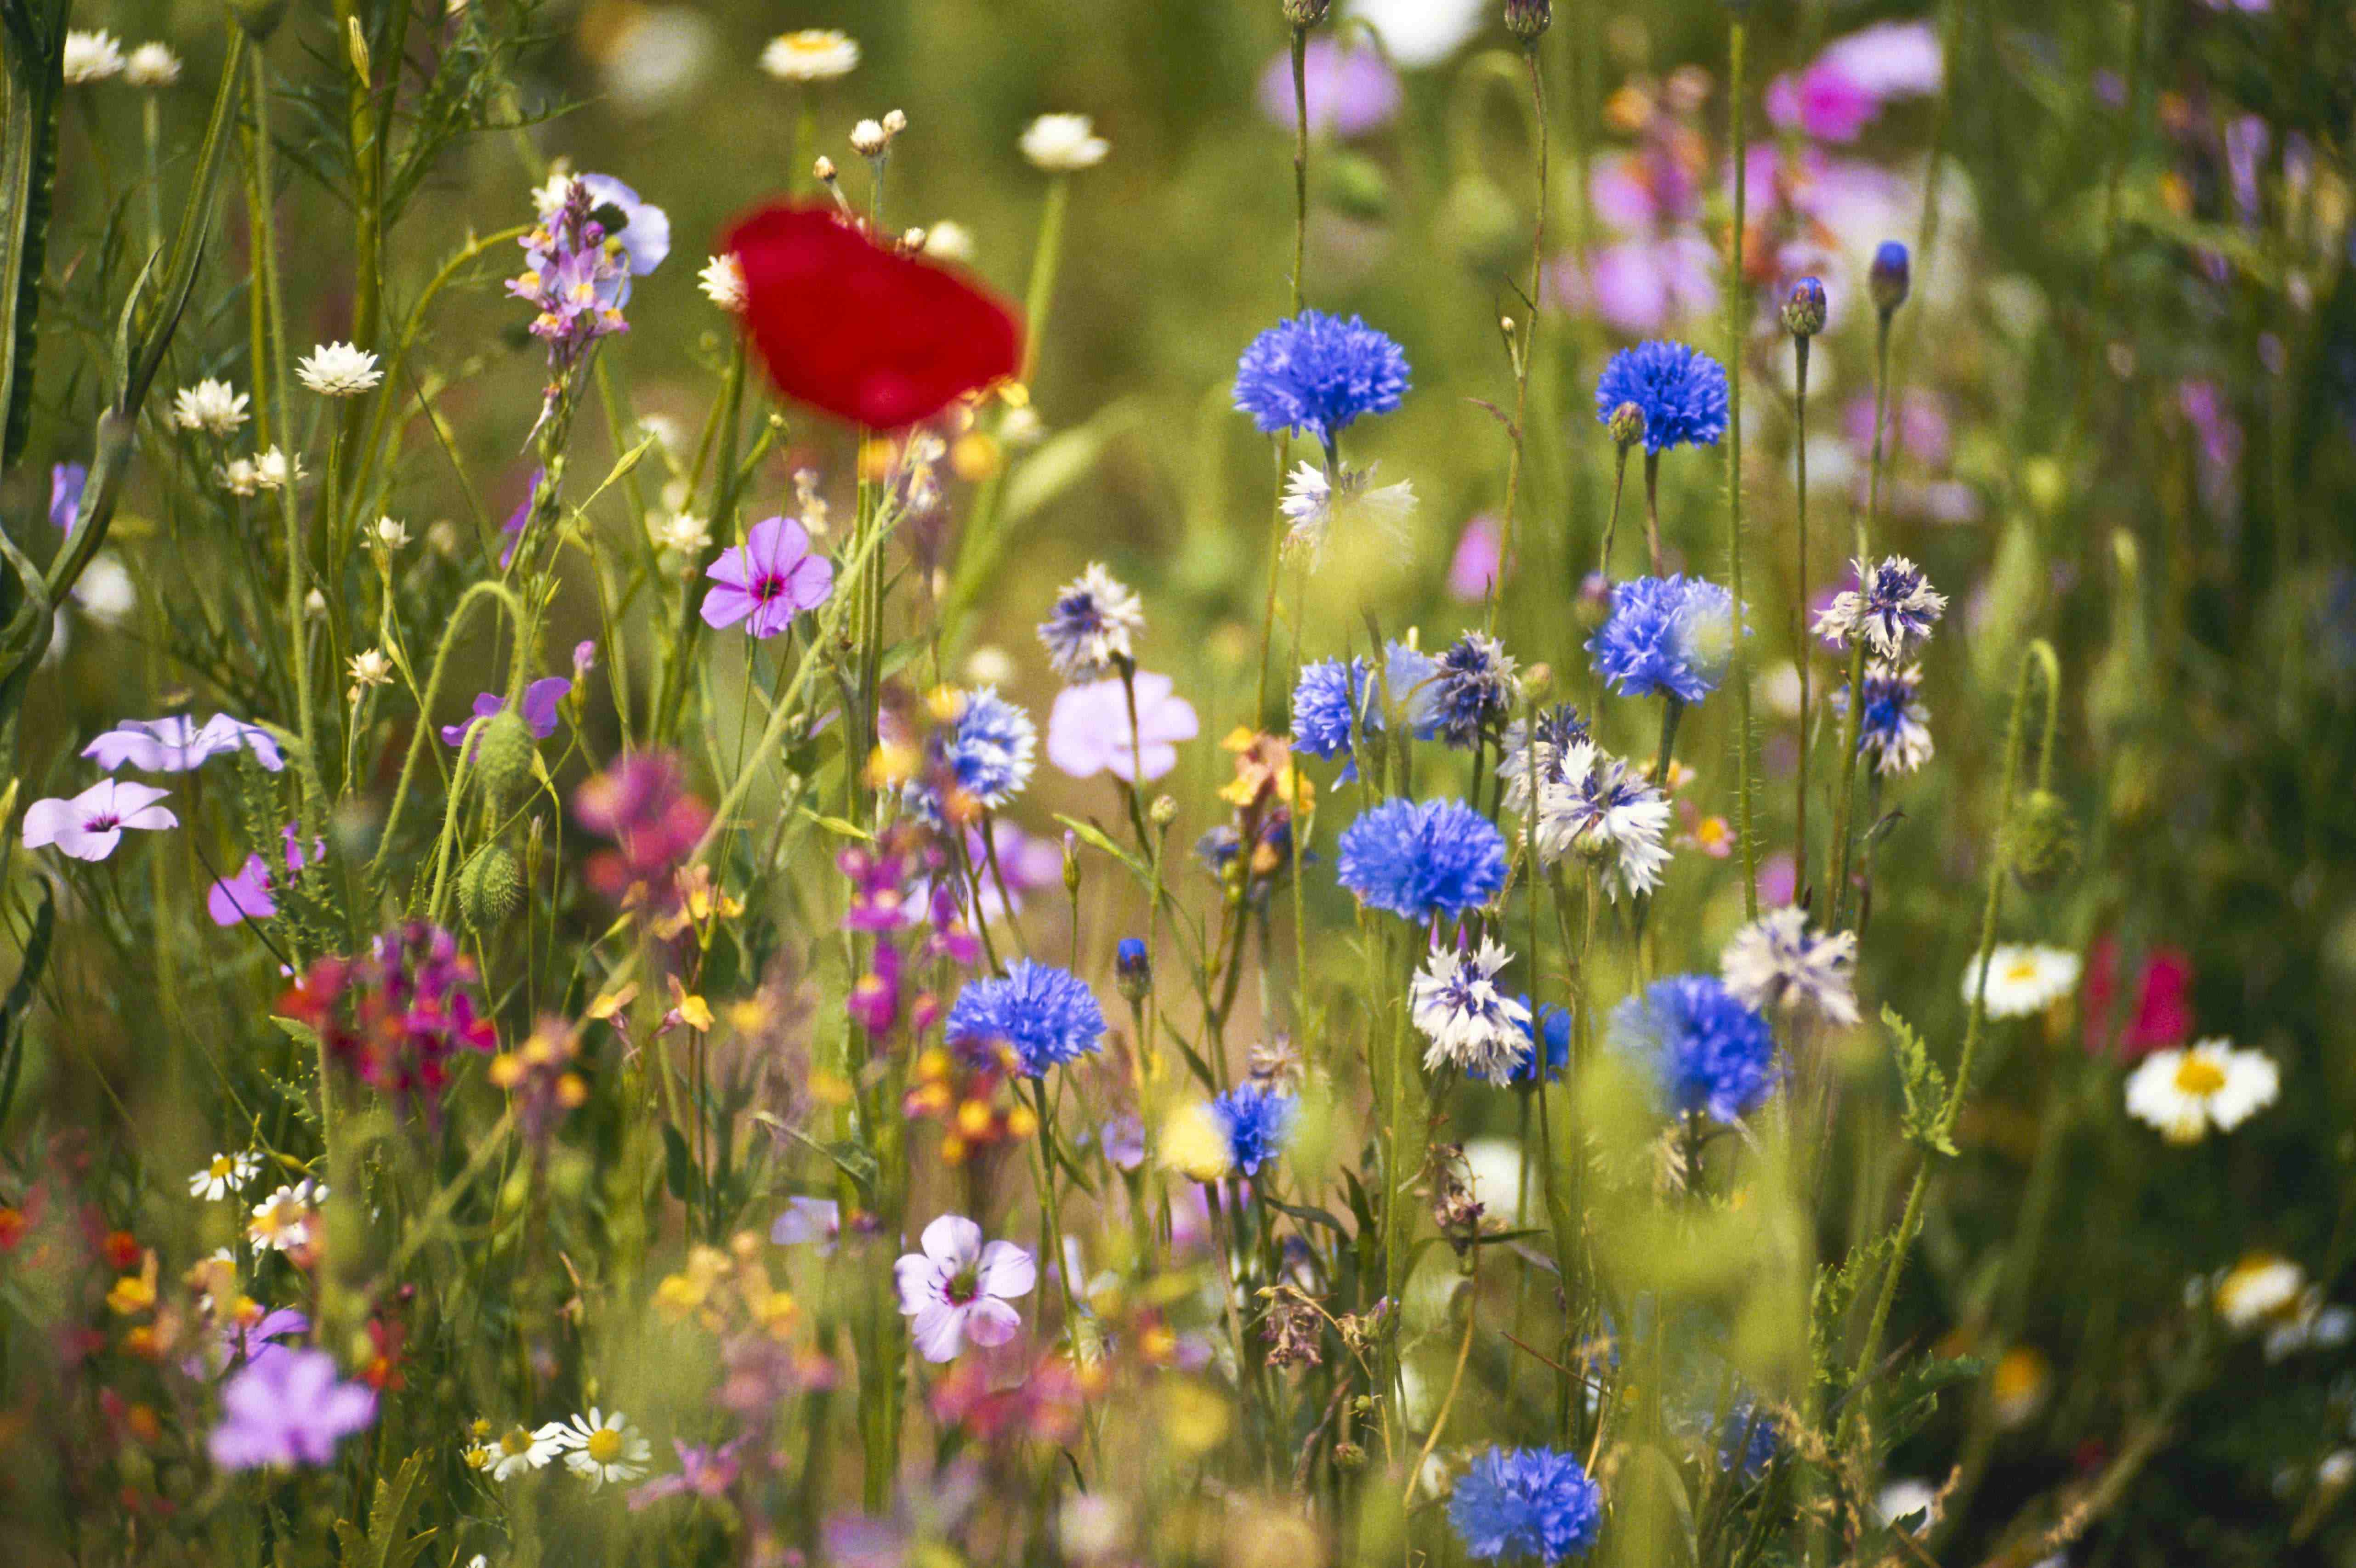 A beautiful colourful photo of a close-up wildflowers